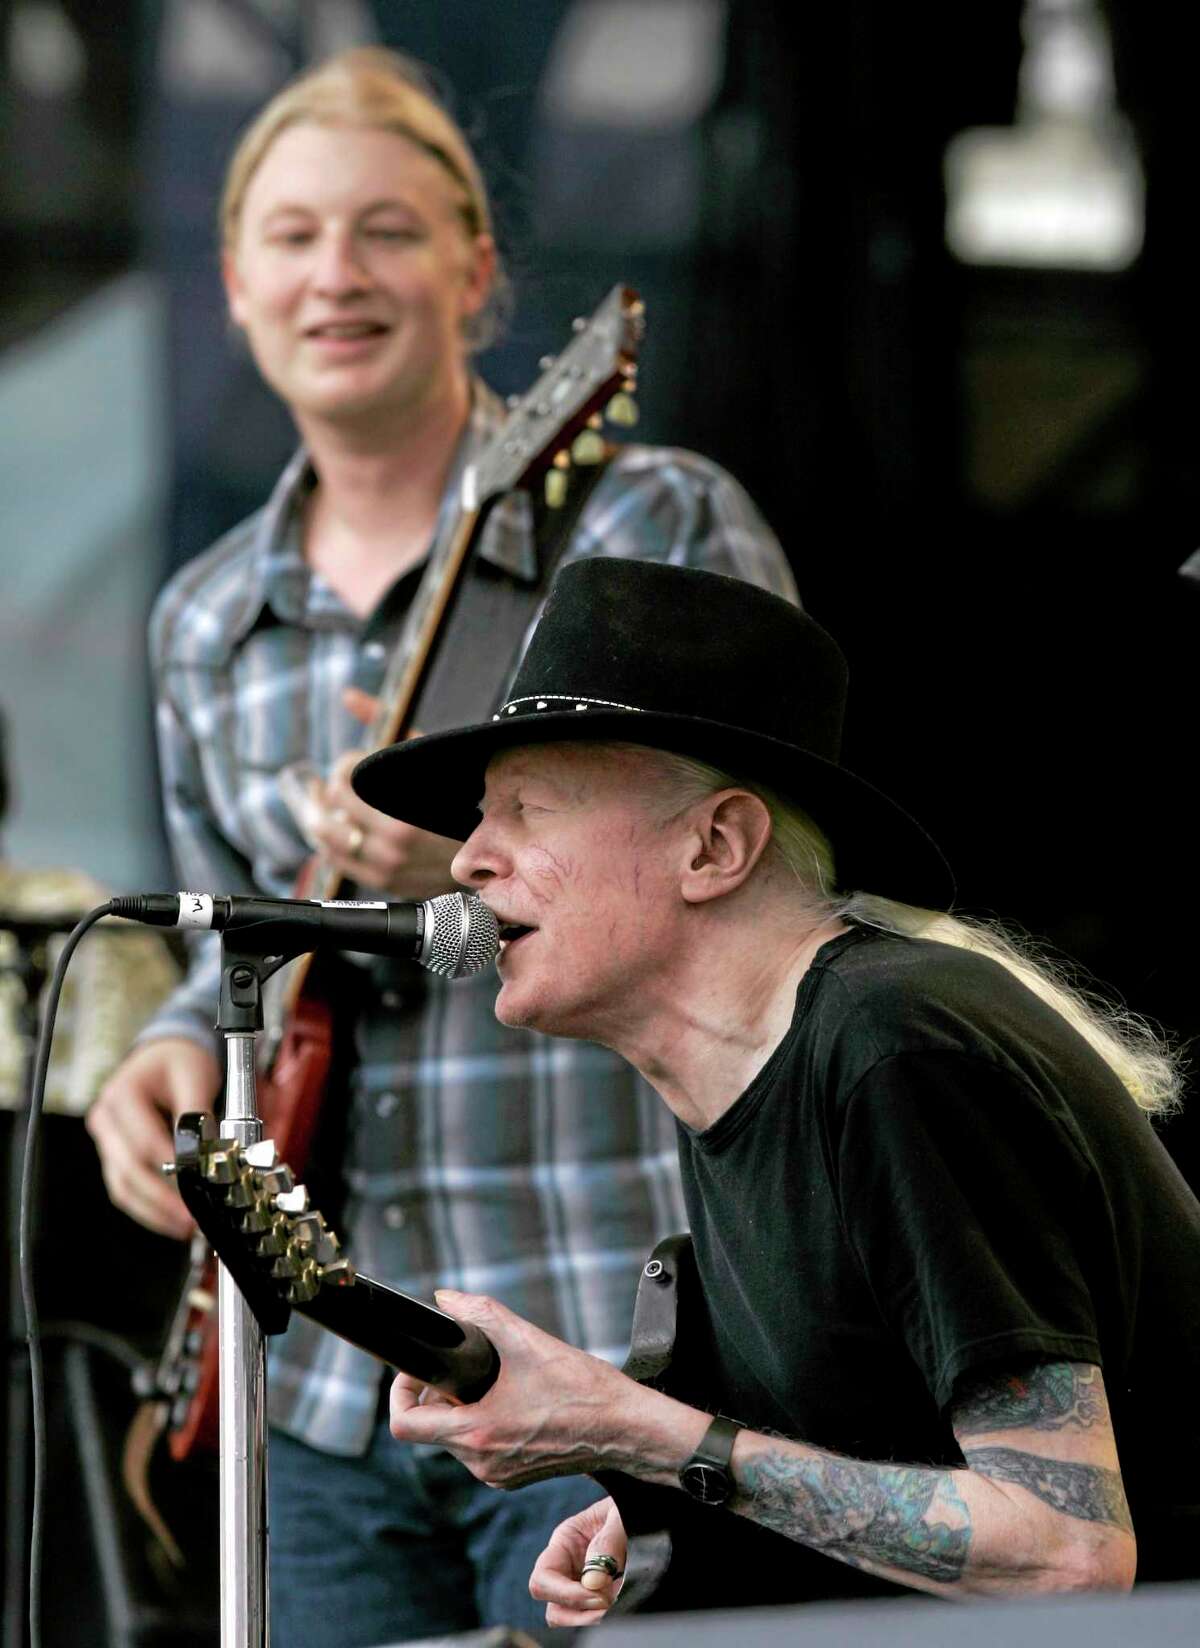 FILE - In this Saturday, July 28, 2007 file photo, Johnny Winter, seated, and Derek Trucks, background, perform "Highway 61" at the Crossroads Guitar Festival in Chicago. Texas blues icon Johnny Winter, who rose to fame in the late 1960s and '70s with his energetic performances and recordings that included producing his childhood hero Muddy Waters, died in Zurich, Switzerland on Wednesday, July 16, 2014. He was 70. (AP Photo/Charles Rex Arbogast, File)